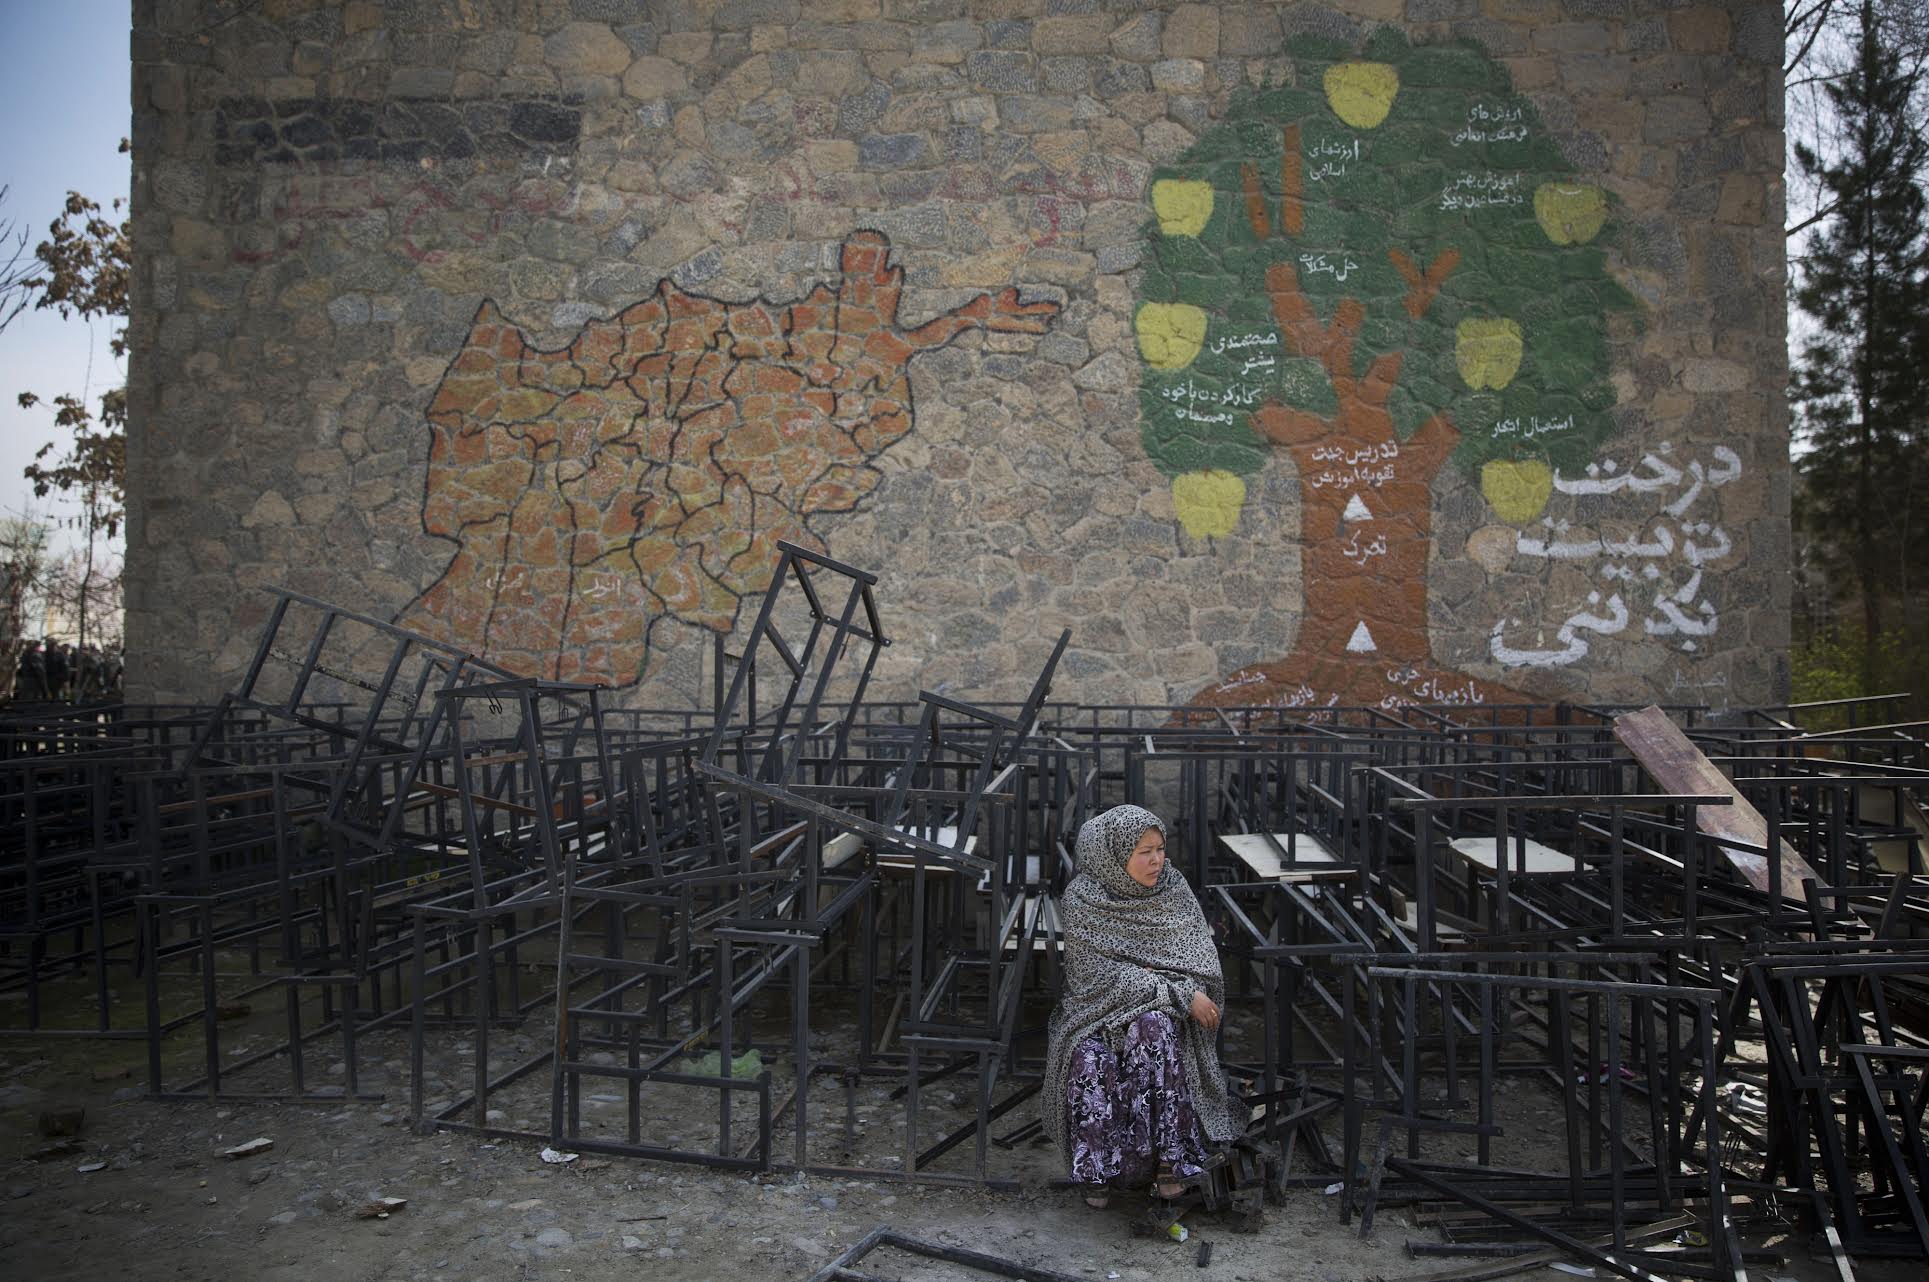 A woman sits among discarded tables and benches. From the Afghanistan: “Graveyard” of Empires Exhibit Flyer